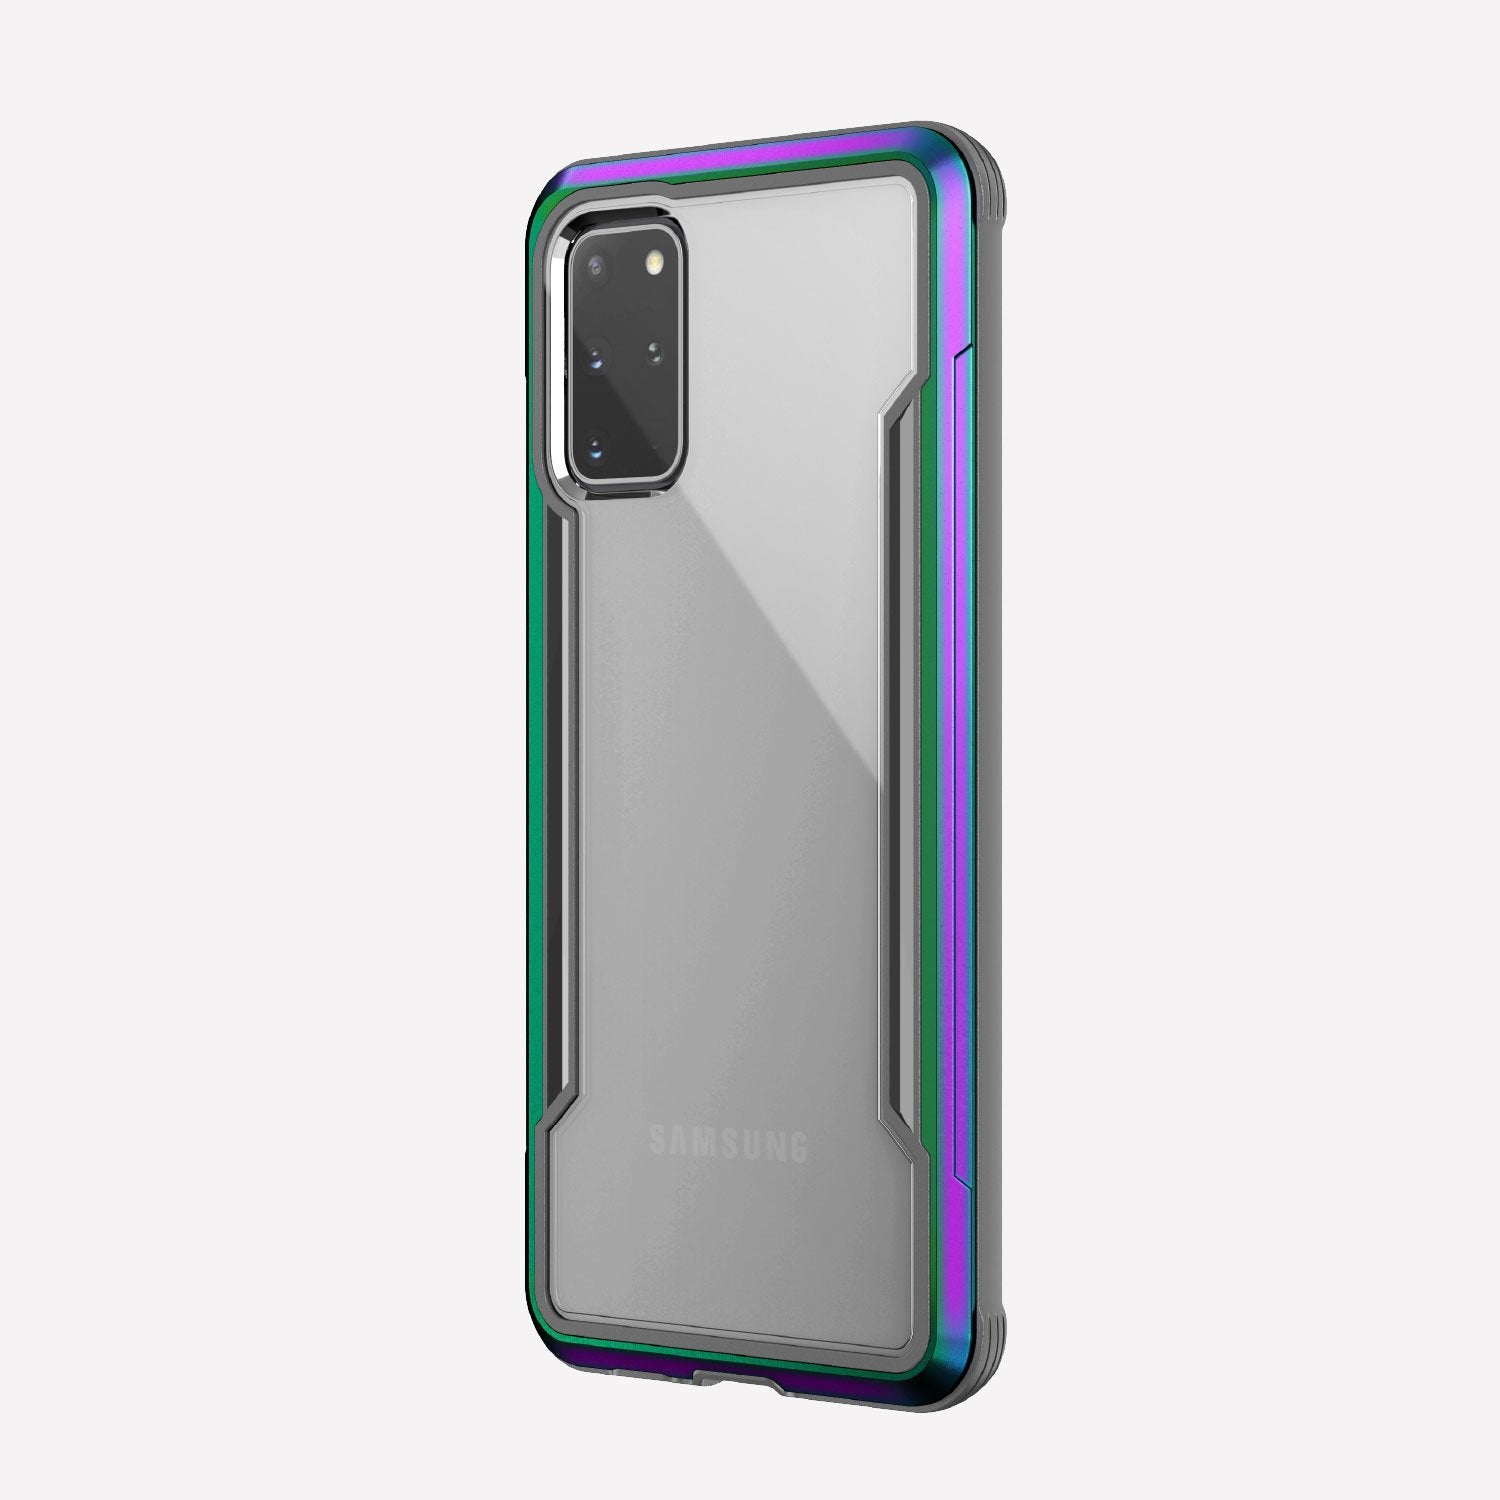 Defense shield iridescent with silver Galaxy S20+ in it showing the back view with the iridescent color on the back panel and that it's transparent